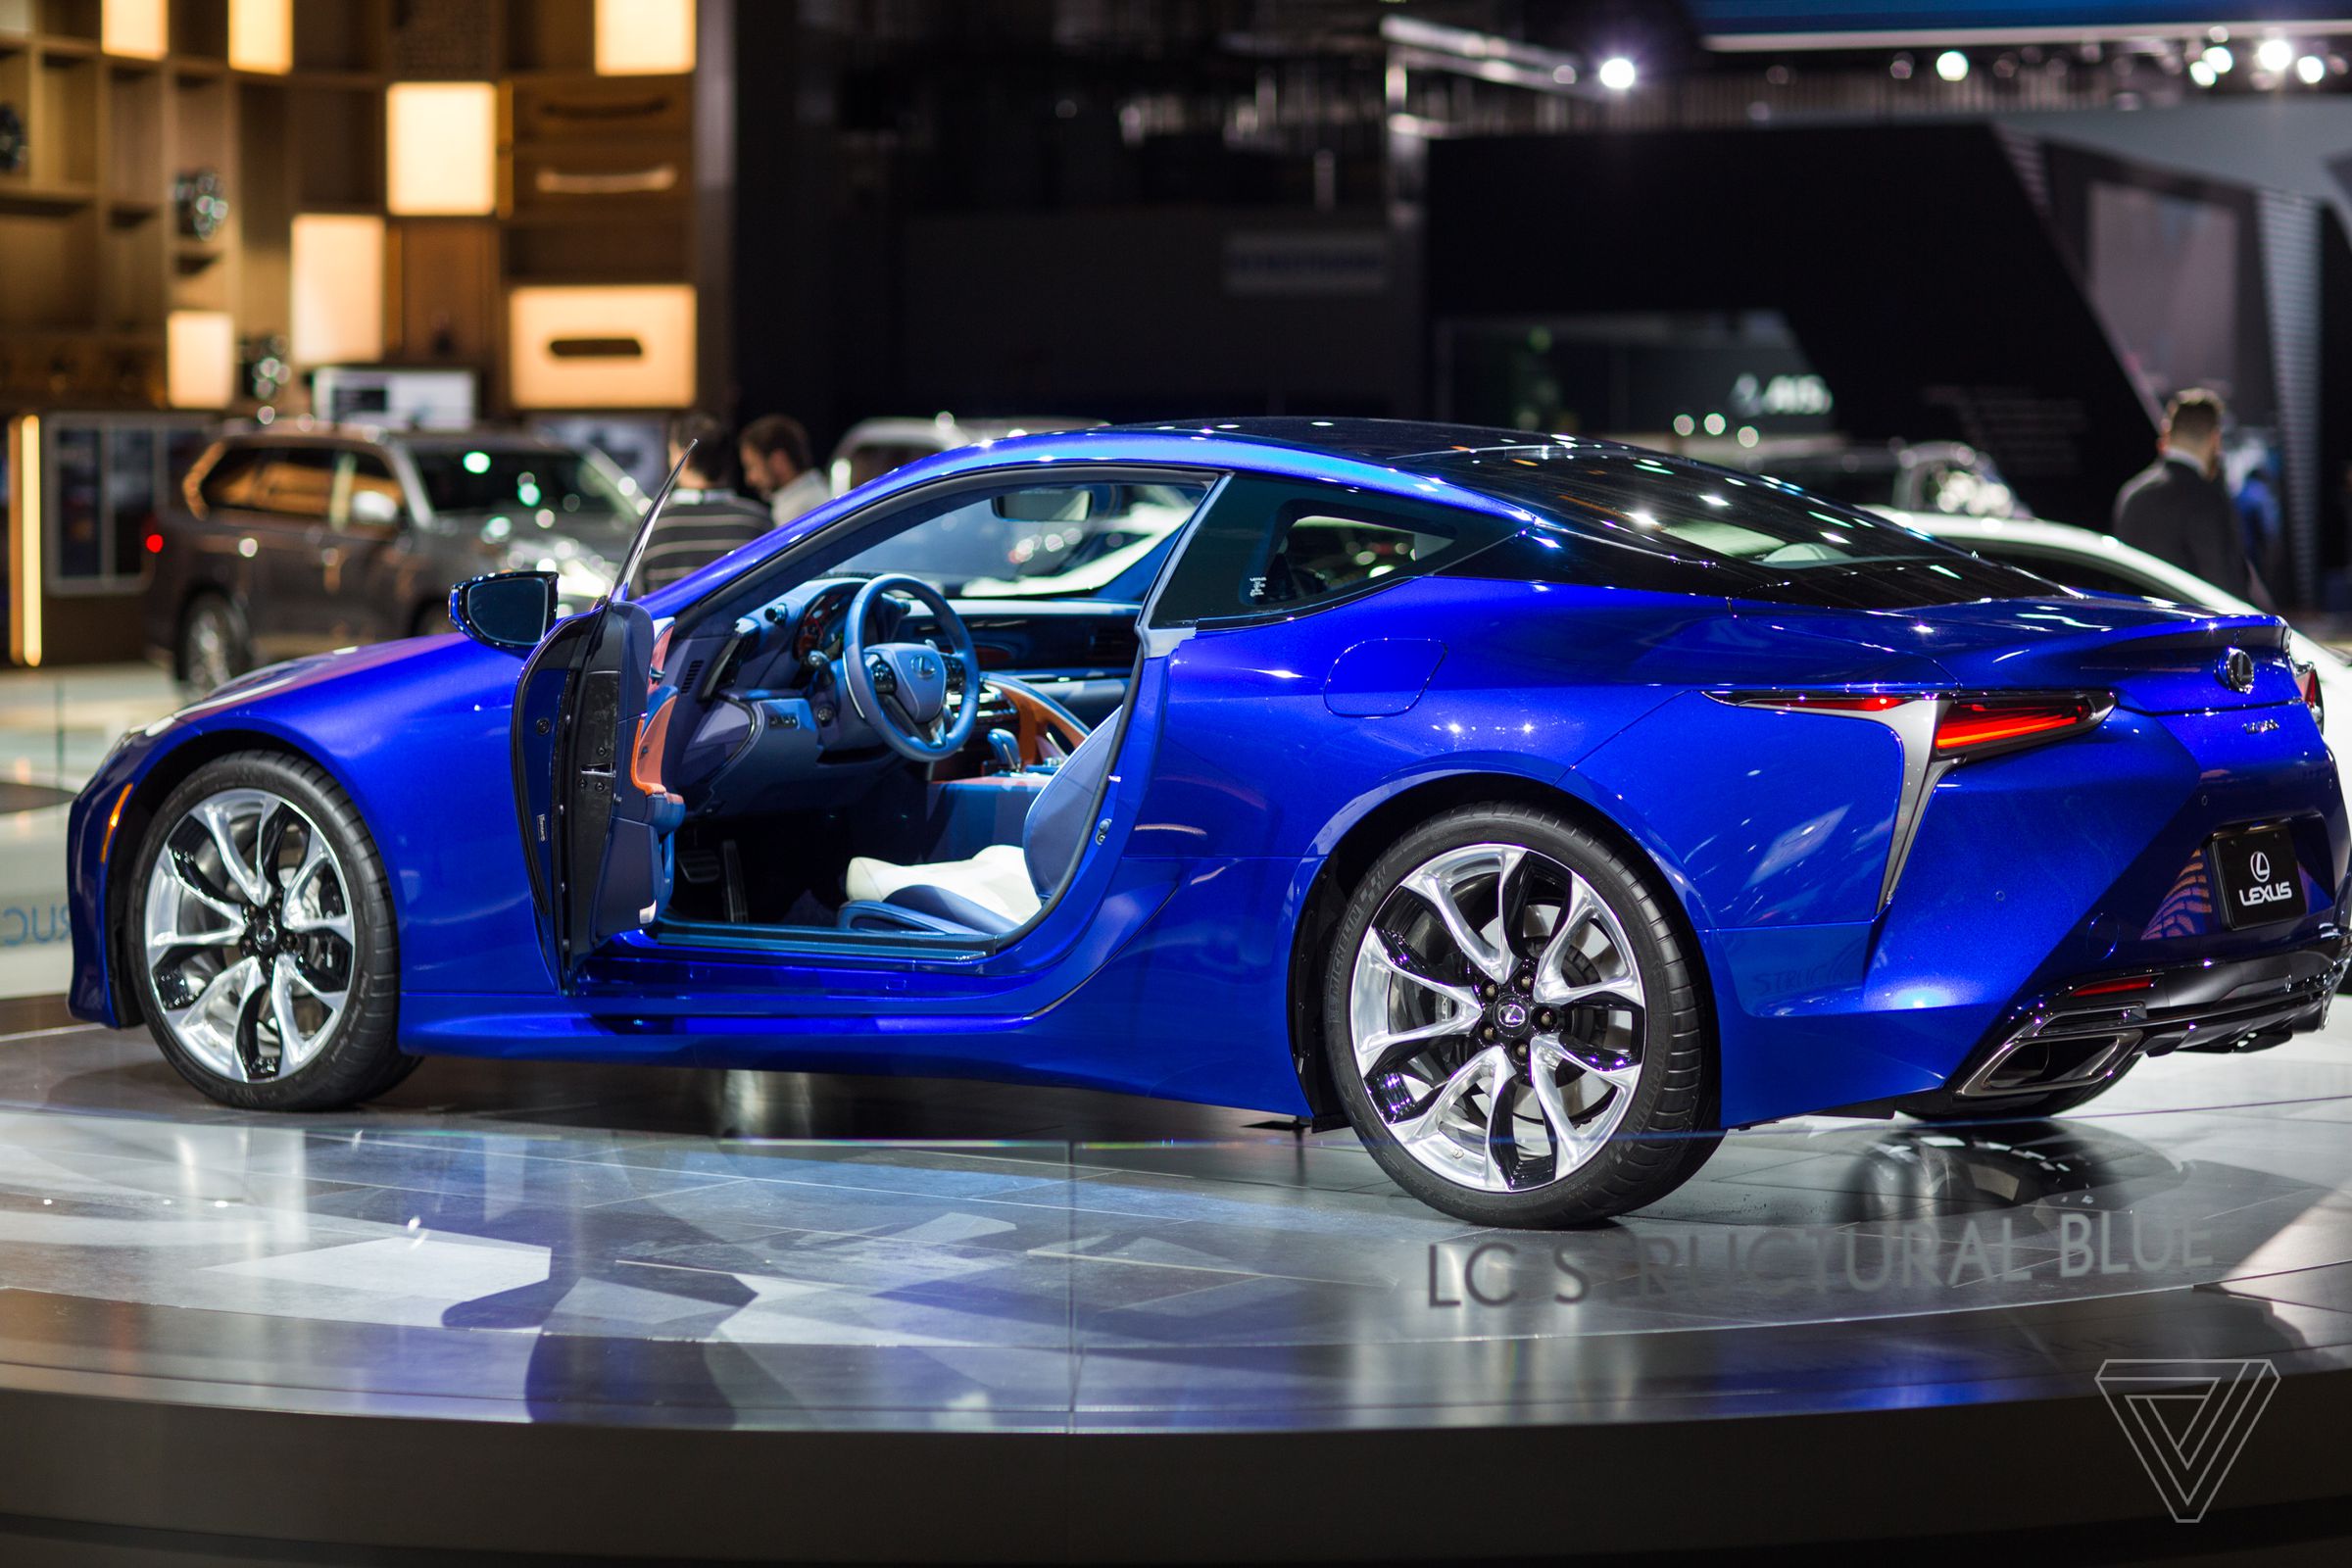 Not to be outdone, Lexus showed off an almost entirely blue version of the LC 500, which it designed in honor of a specific hue the company supposedly took 15 years to develop. Thanks? 